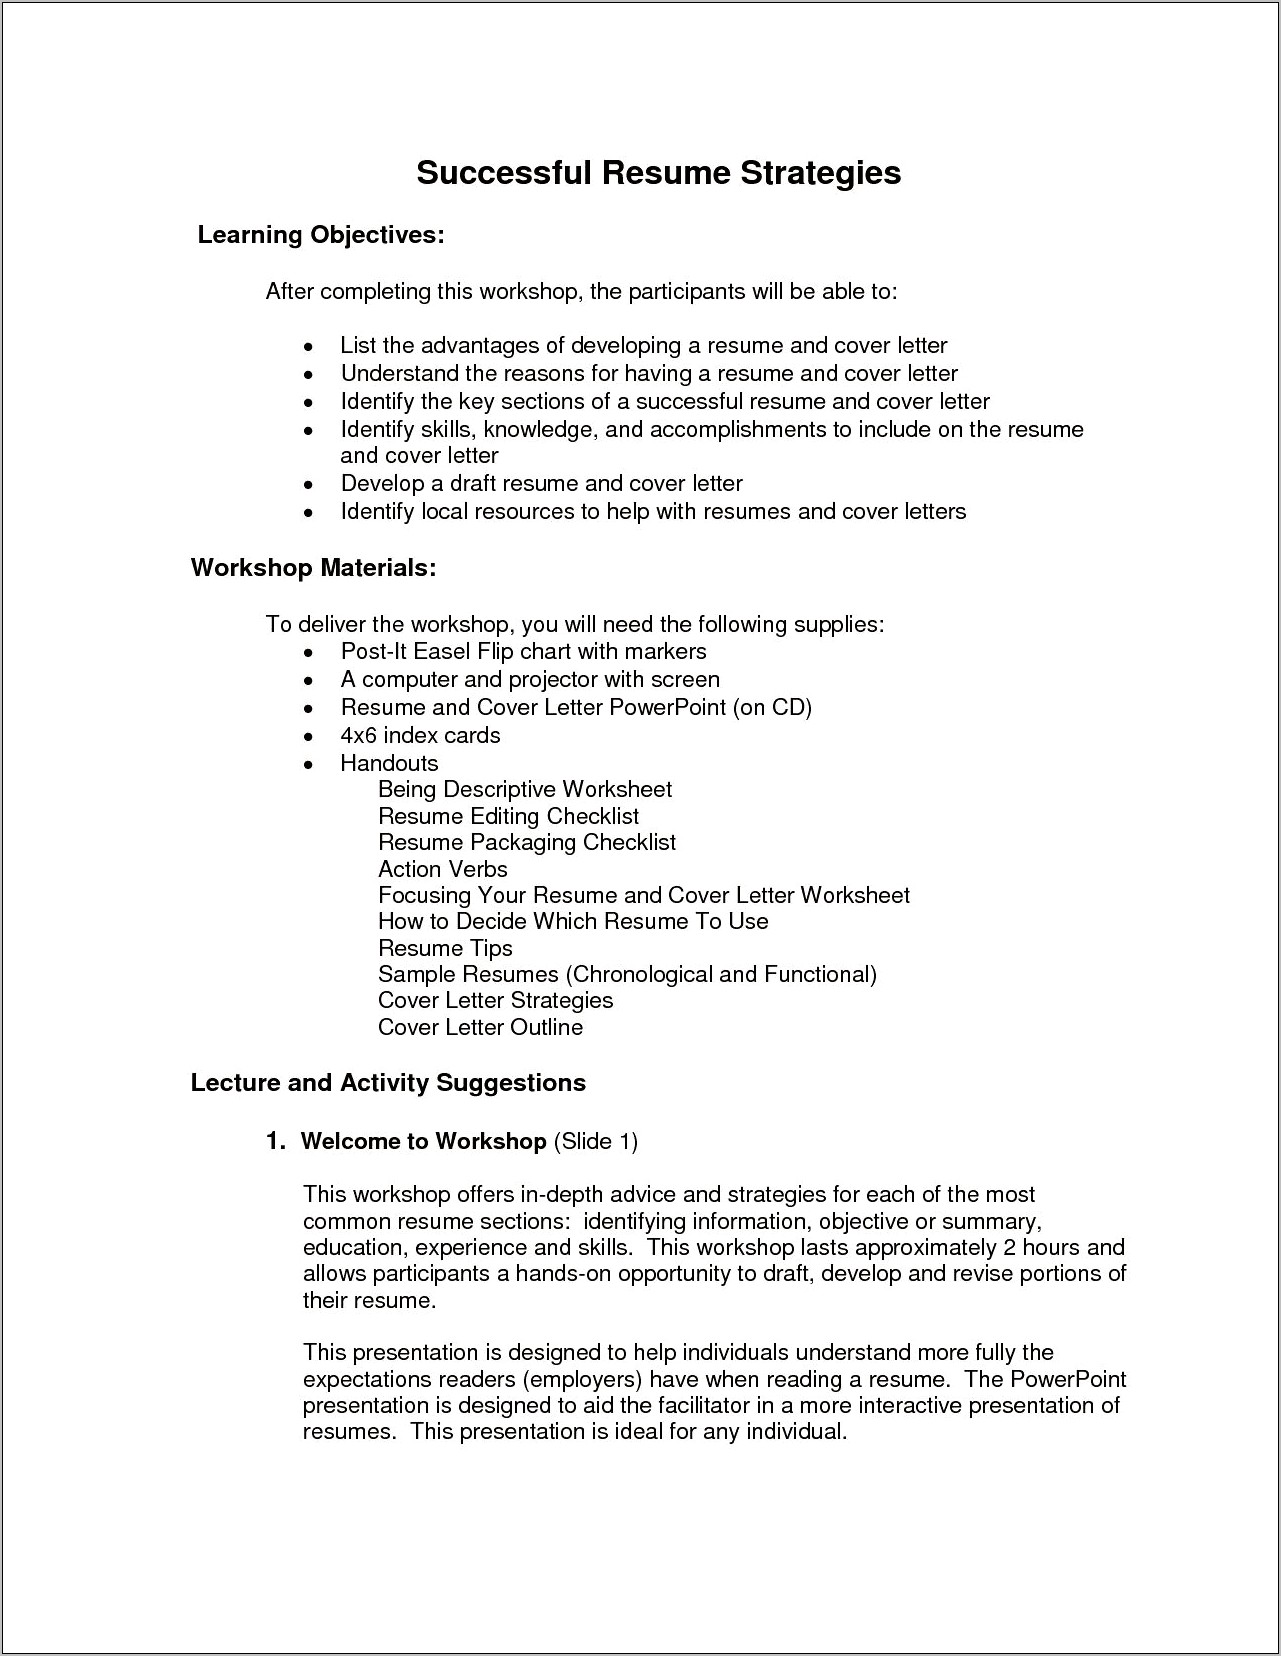 Sample Resume For Phlebotomy With No Experience